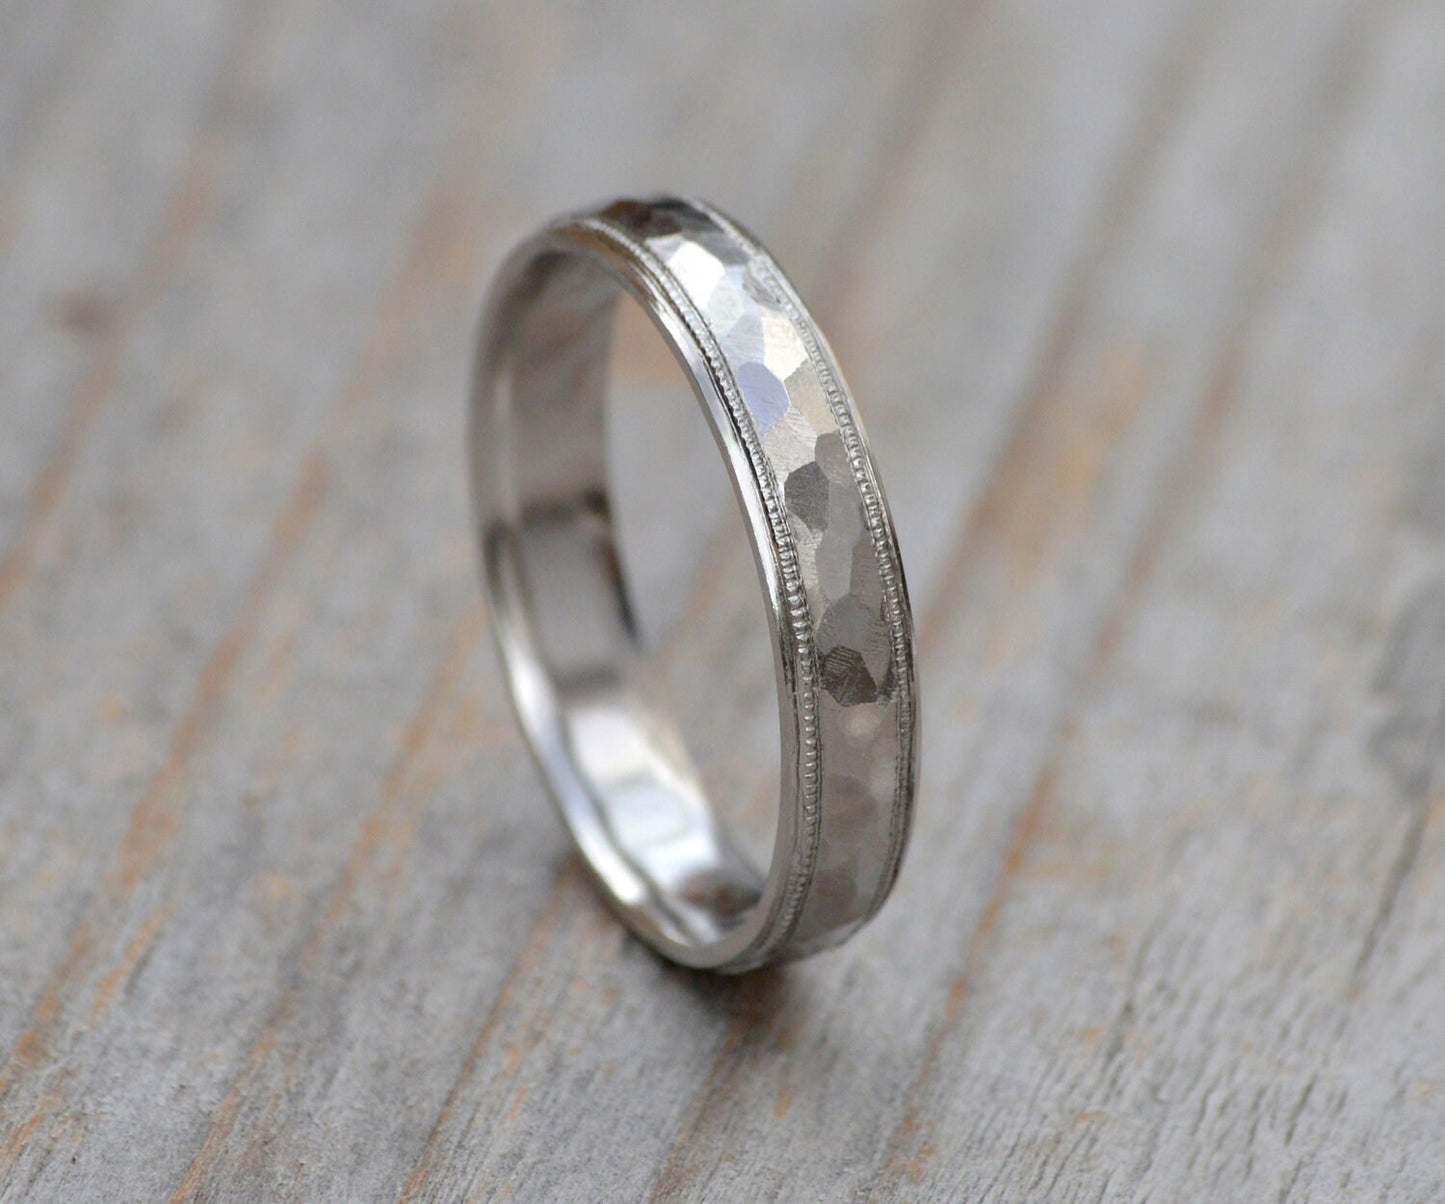 Platinum Wedding Band with Hammer Effect and Milgrain, Platinum Milgrain Wedding Ring, Platinum Wedding Ring, Rustic Wedding Band